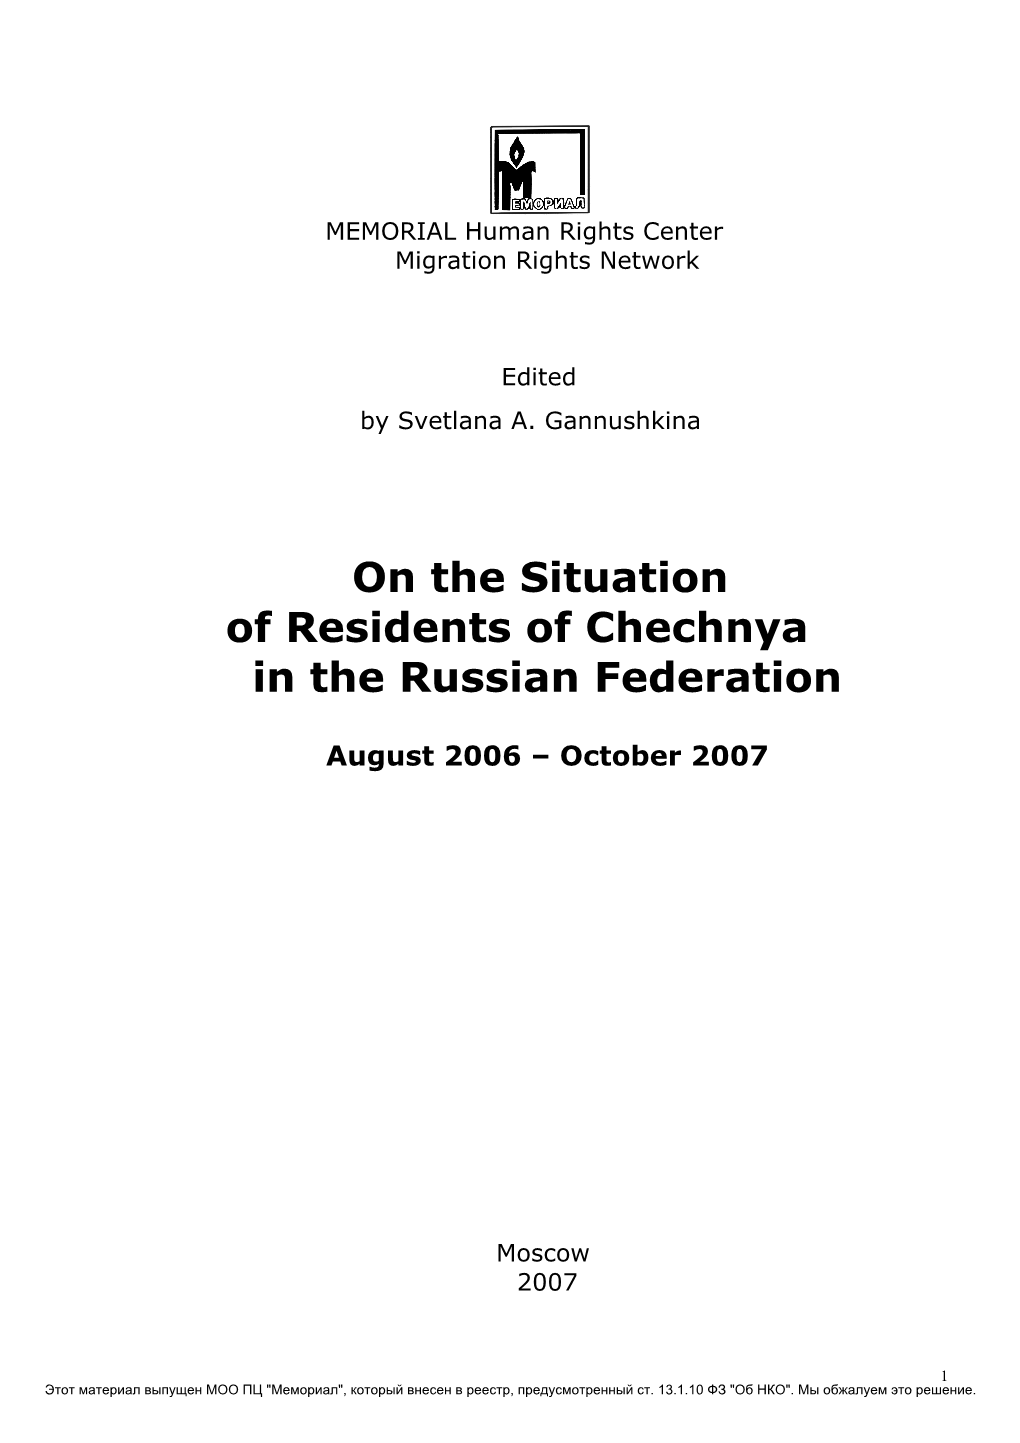 On the Situation of Residents of Chechnya in the Russian Federation